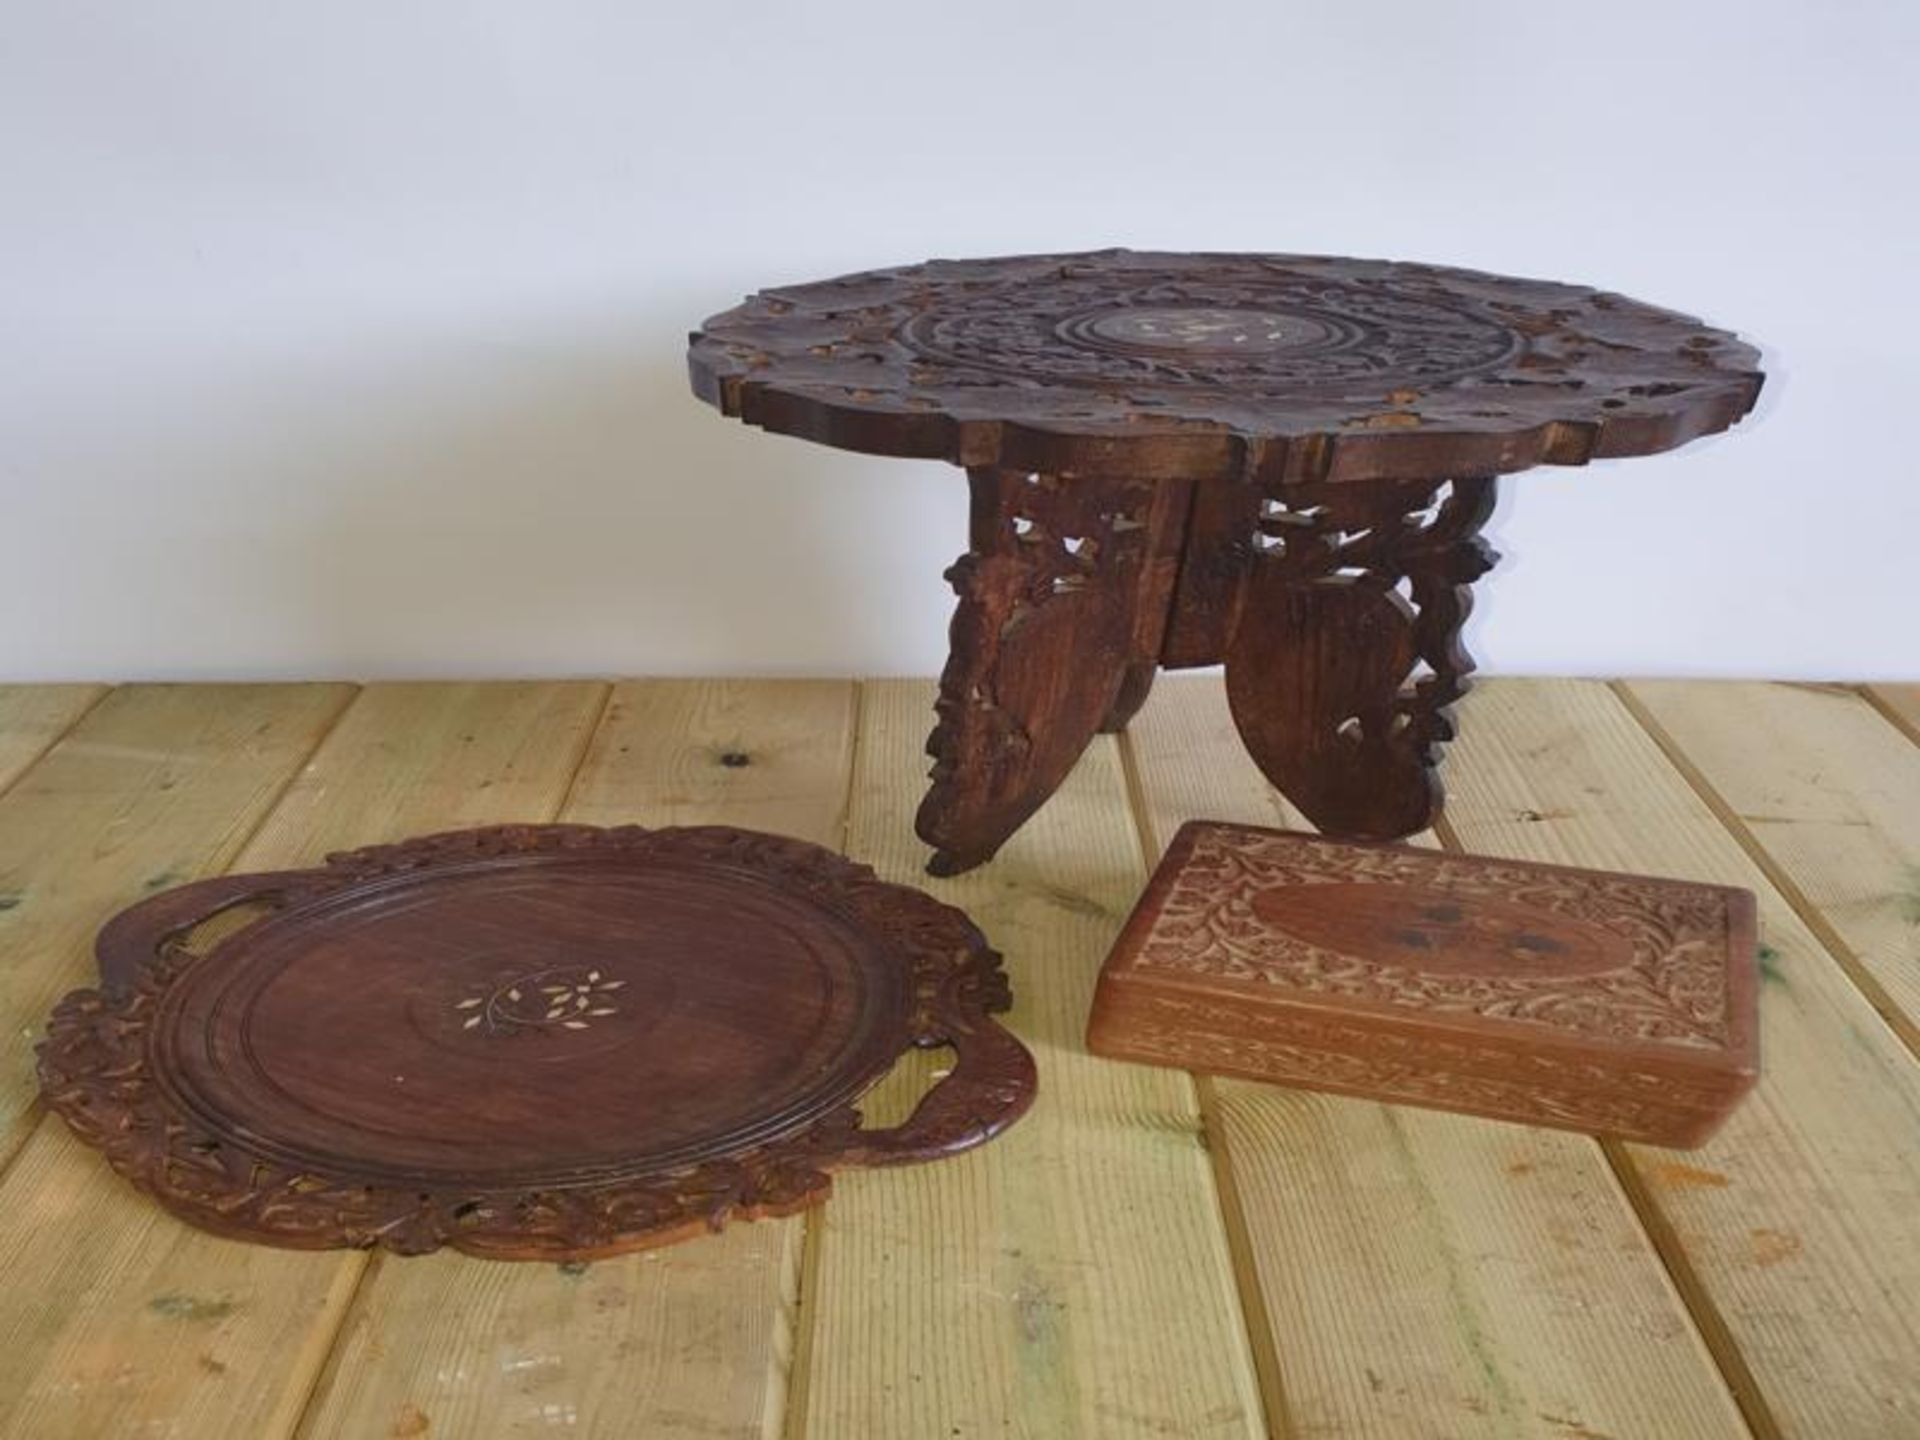 Indian Carved Table, Plate & Box